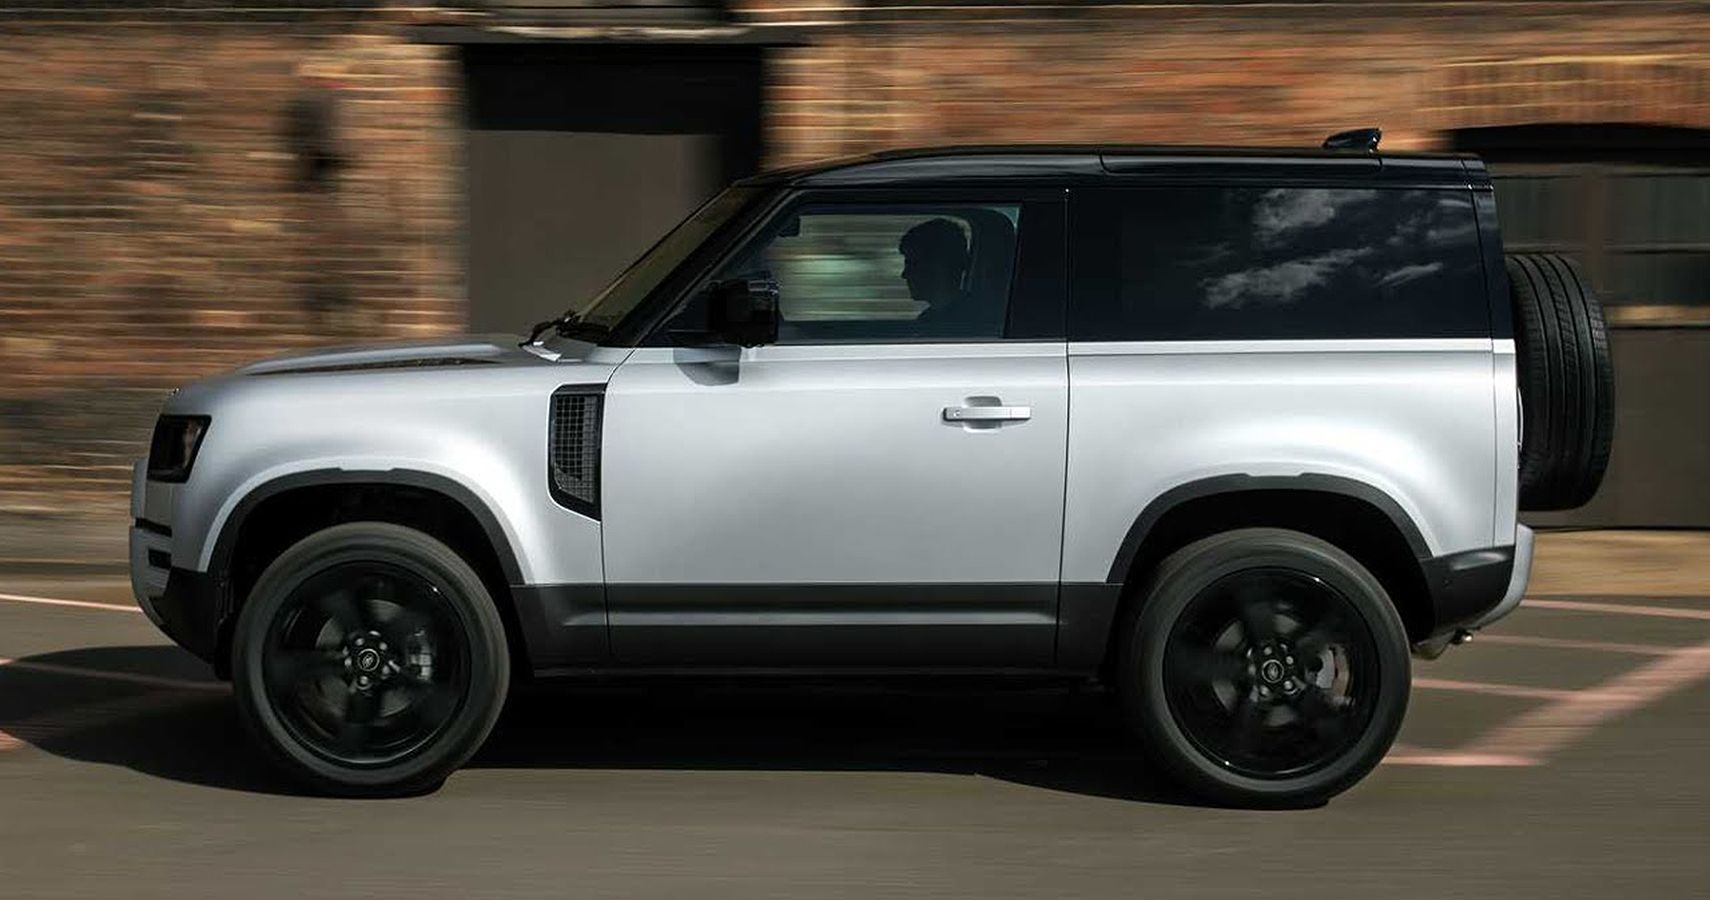 The World Is Going Electric So The Land Rover 80 Could Be A Hybrid Engine